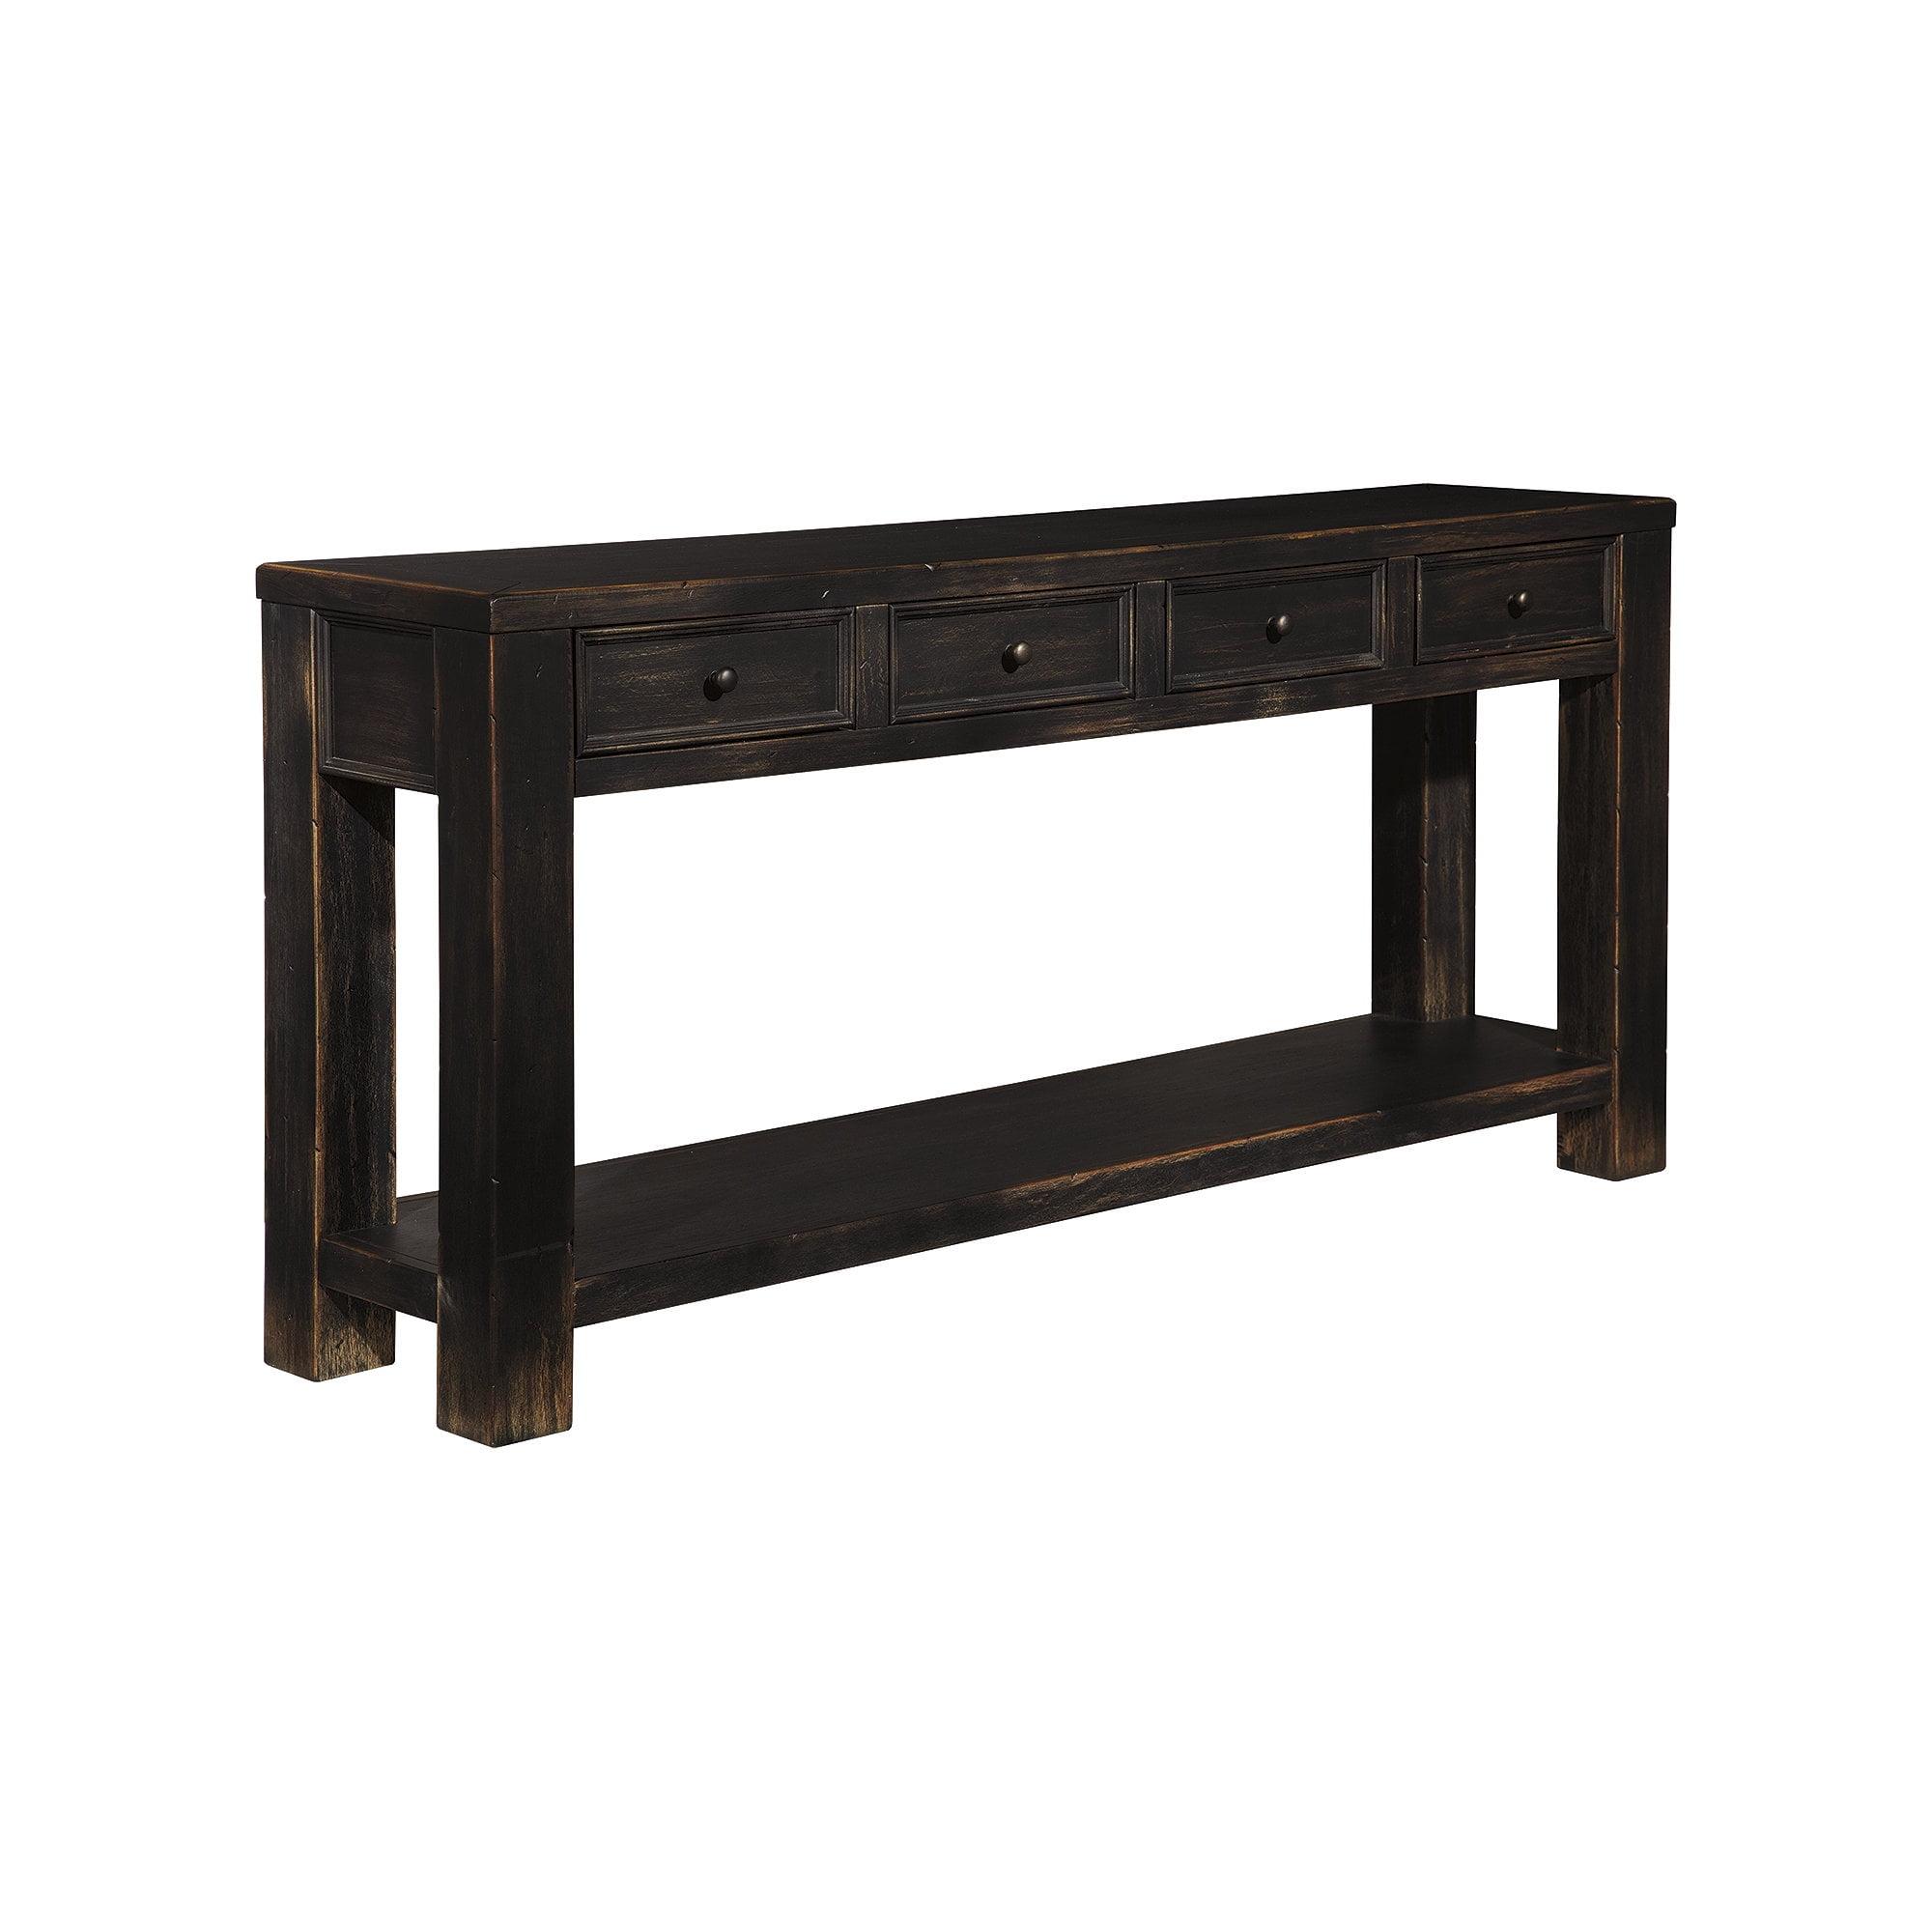 Gavelston Black Wood Rectangular Console Table with Storage